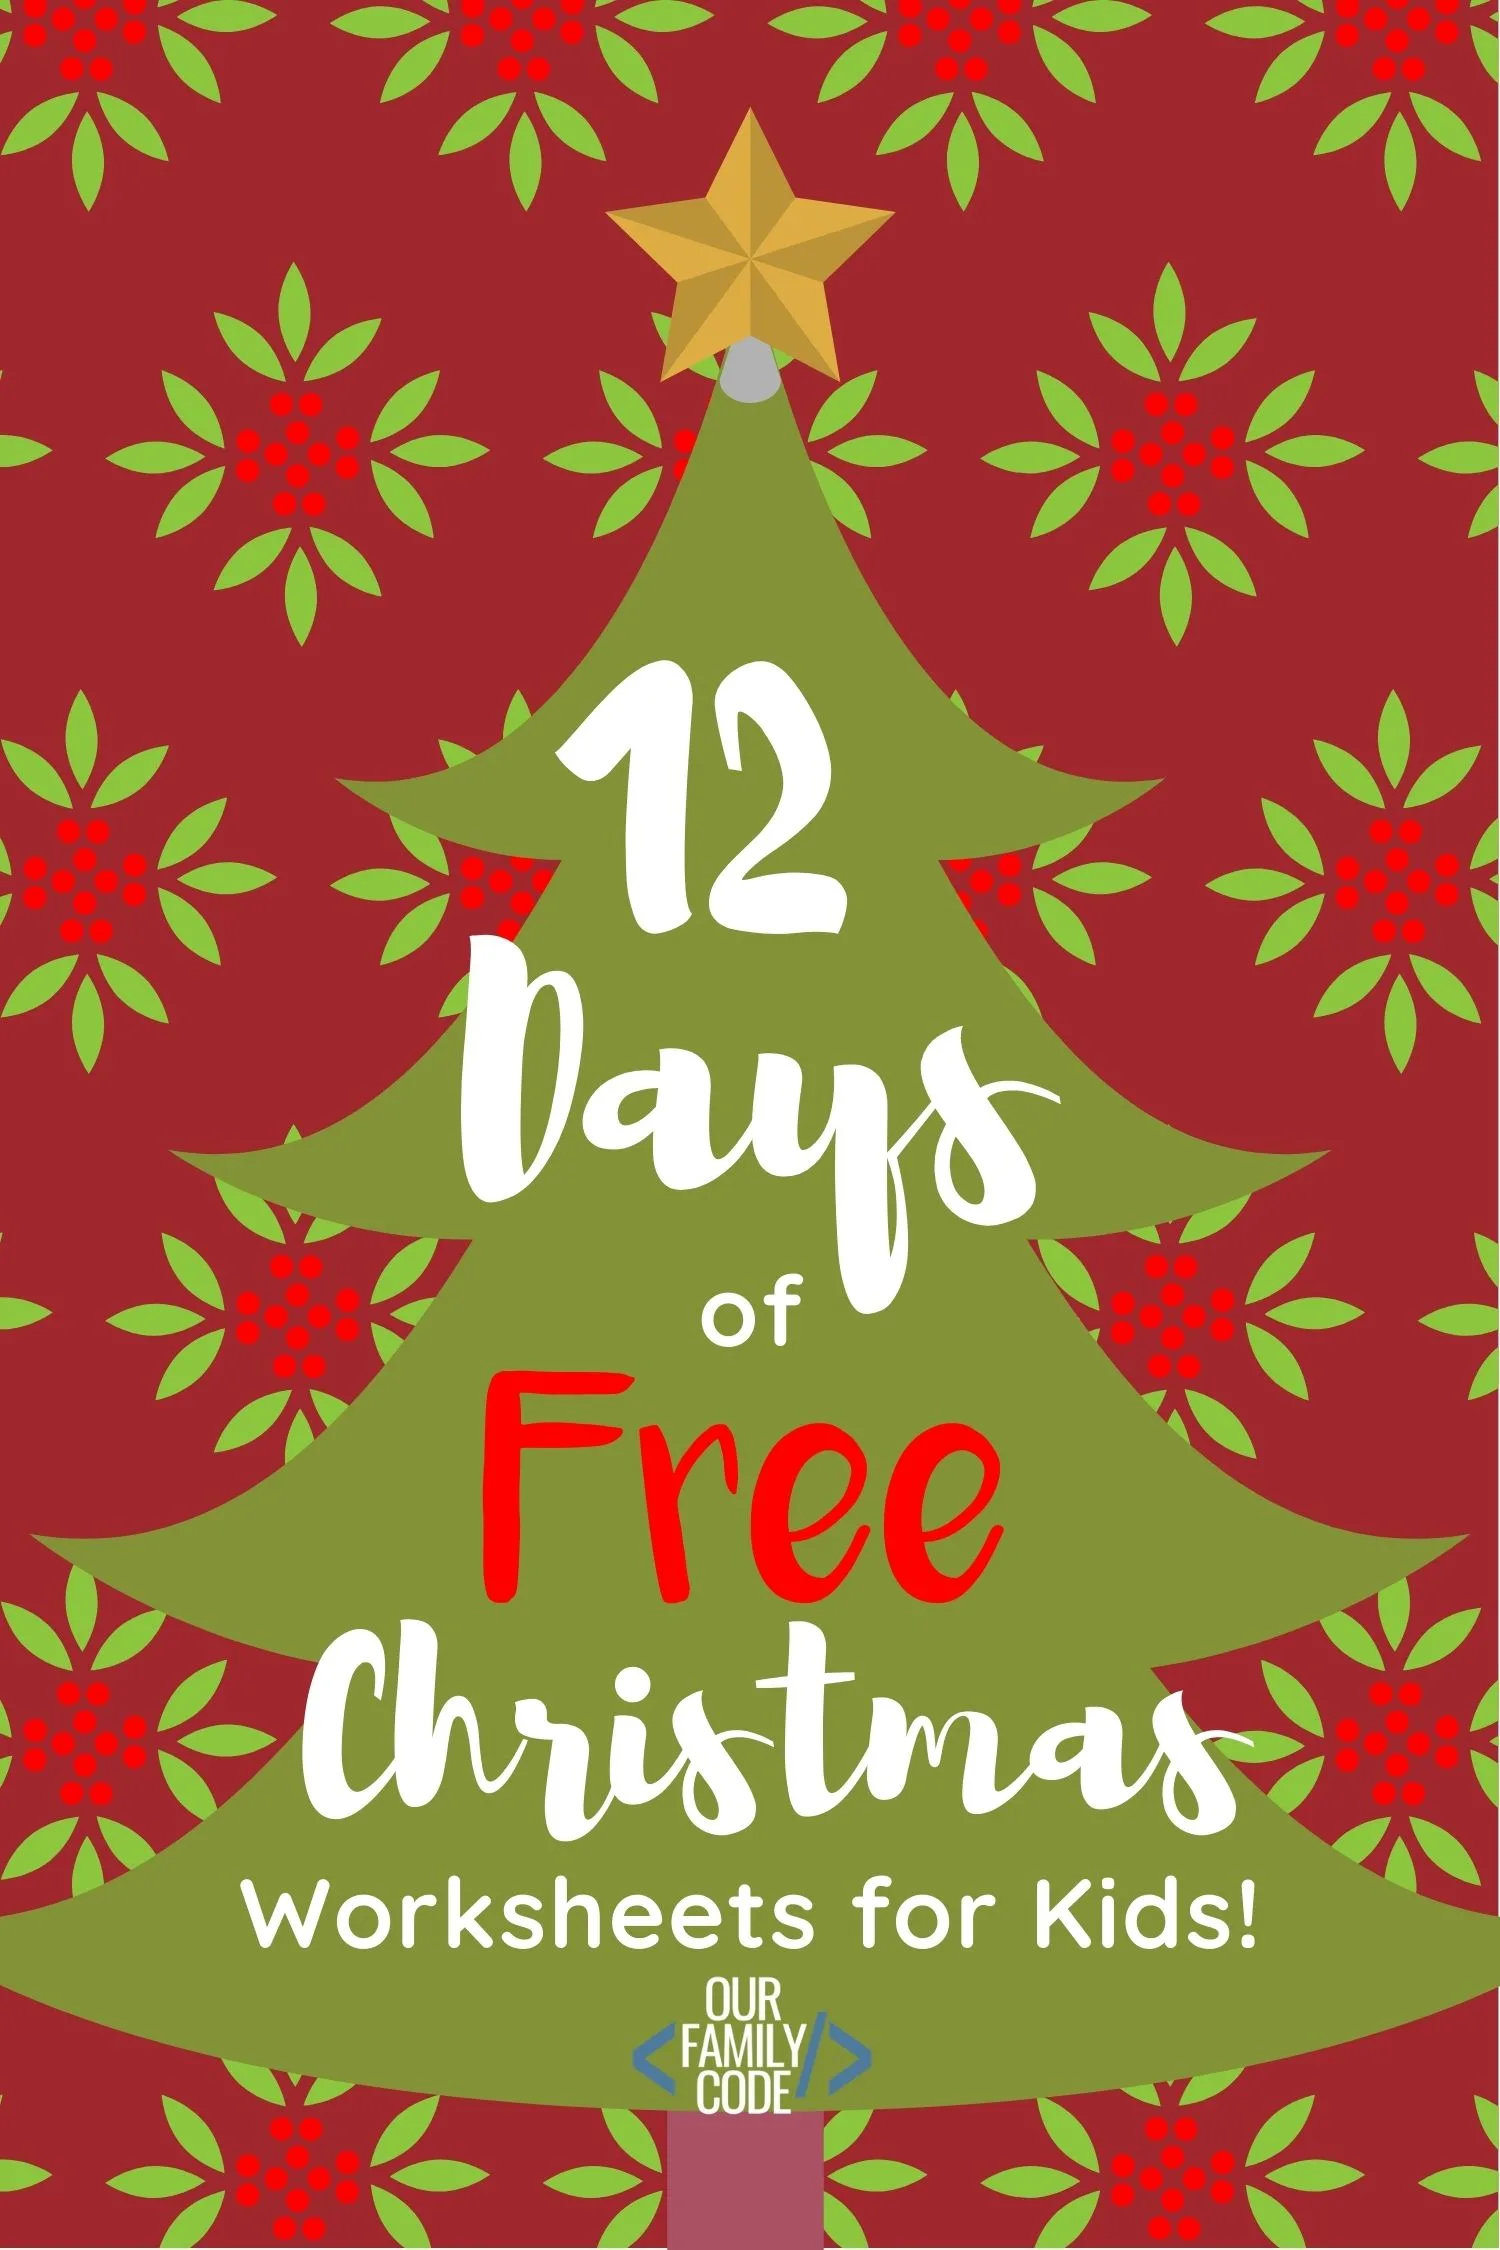 Days of free christmas worksheets for kids